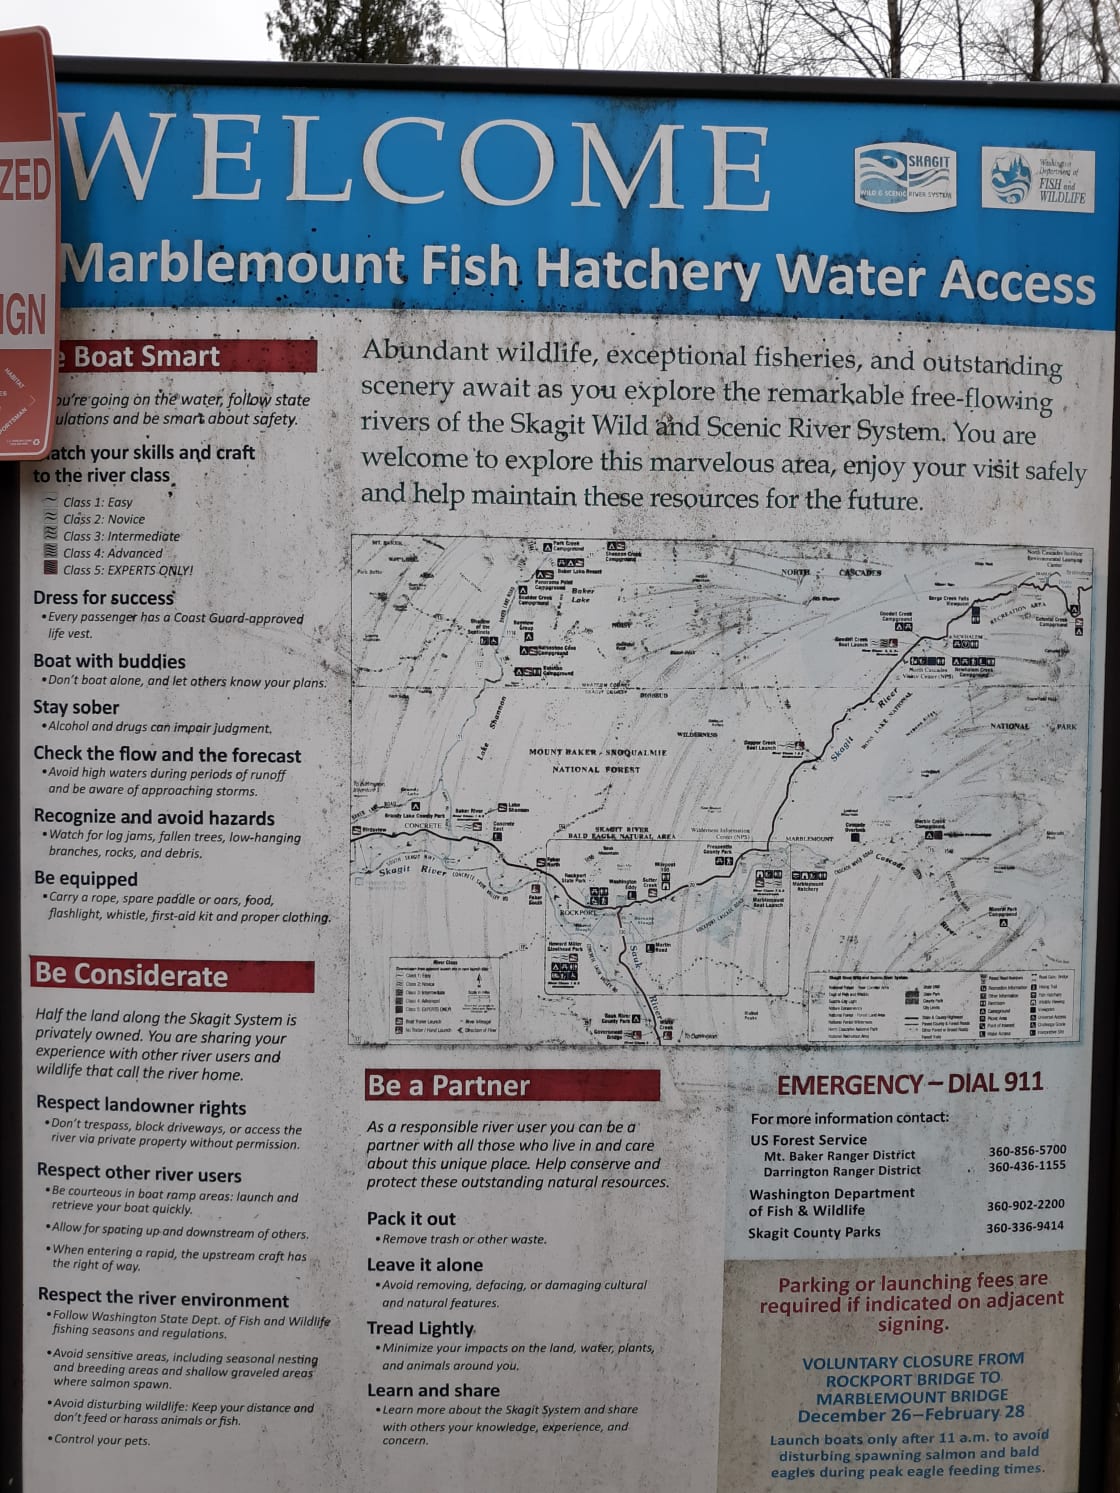 The Fish hatchery is a 2 minute drive. 